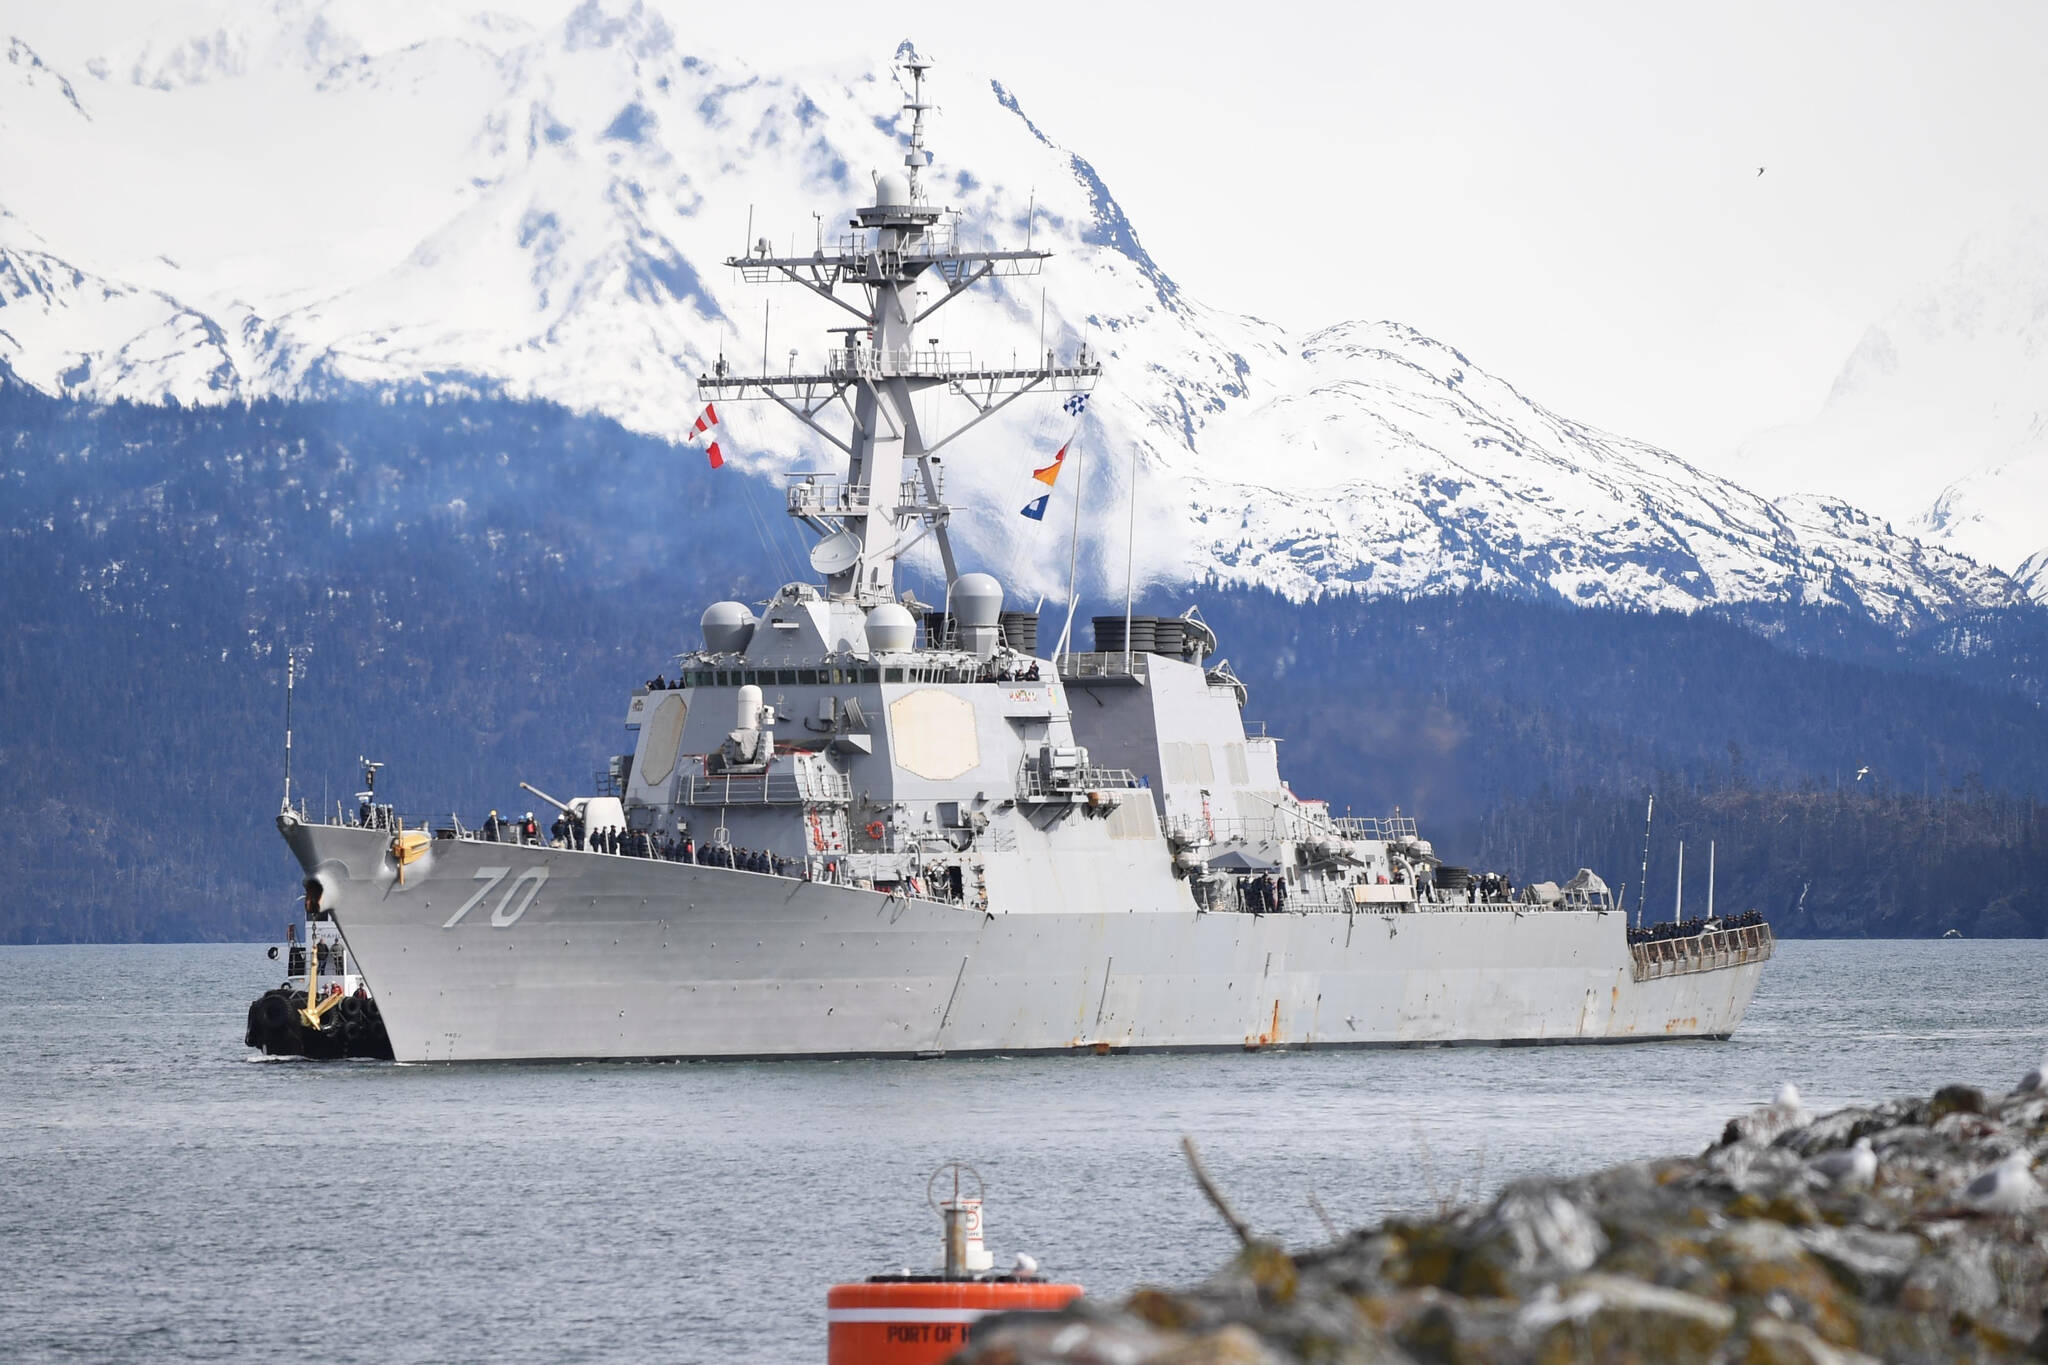 The USS Hopper (DDG 70) prepares to moor in Homer, Alaska, for a scheduled port visit in conjunction with its participation in Northern Edge 2017 in Homer, Alaska, April 29, 2017. The Navy is proposing to considerably expand its exercise area in the Gulf of Alaska. (U.S. Navy / Petty Officer 3rd Class Joseph Montemarano)